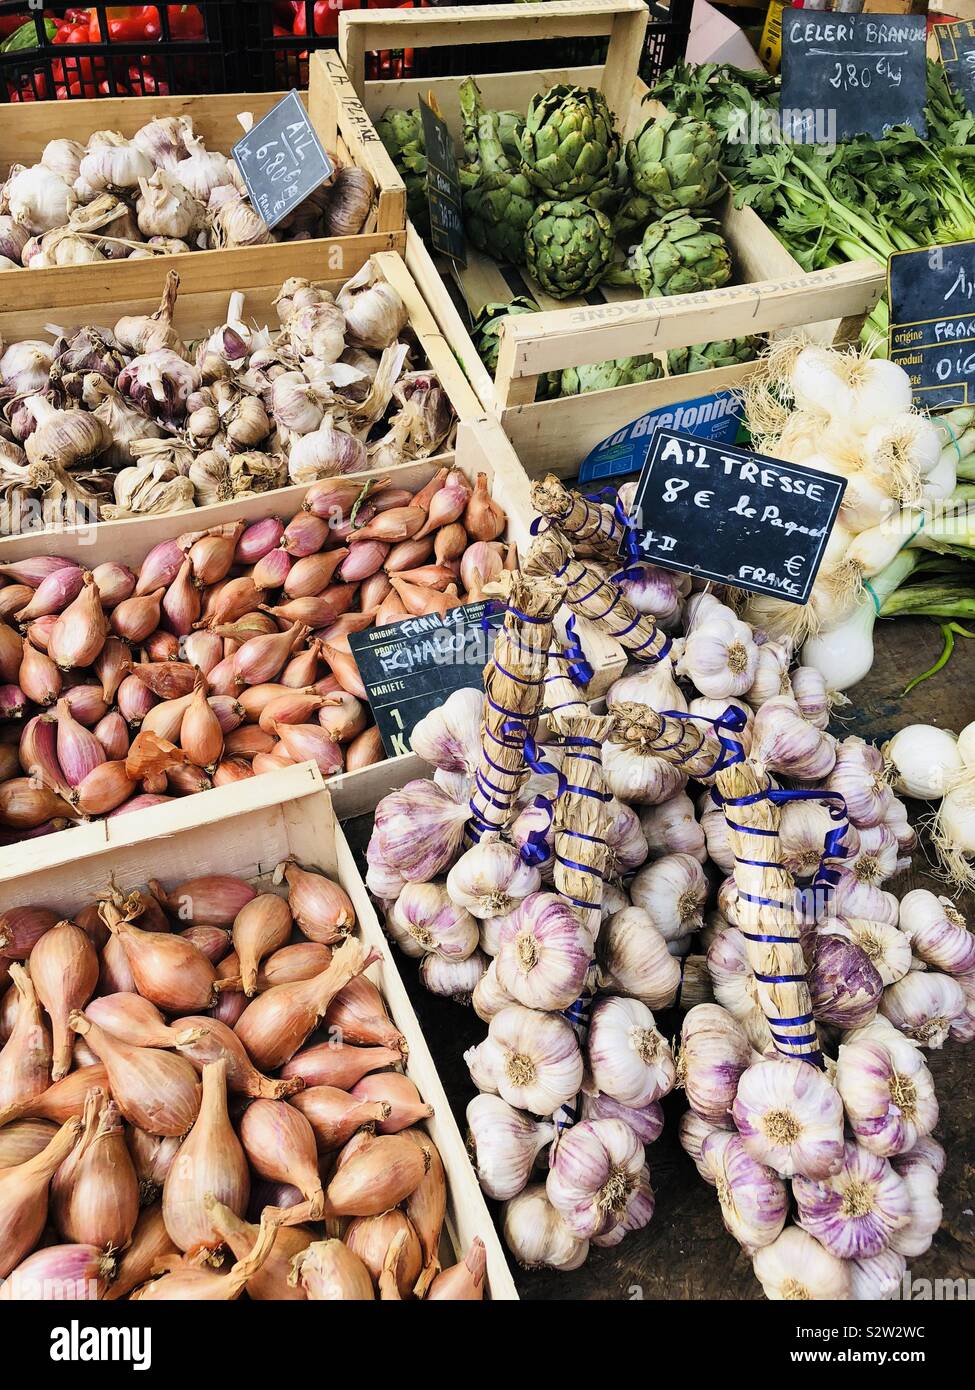 Vegetables for sale in a French market Stock Photo